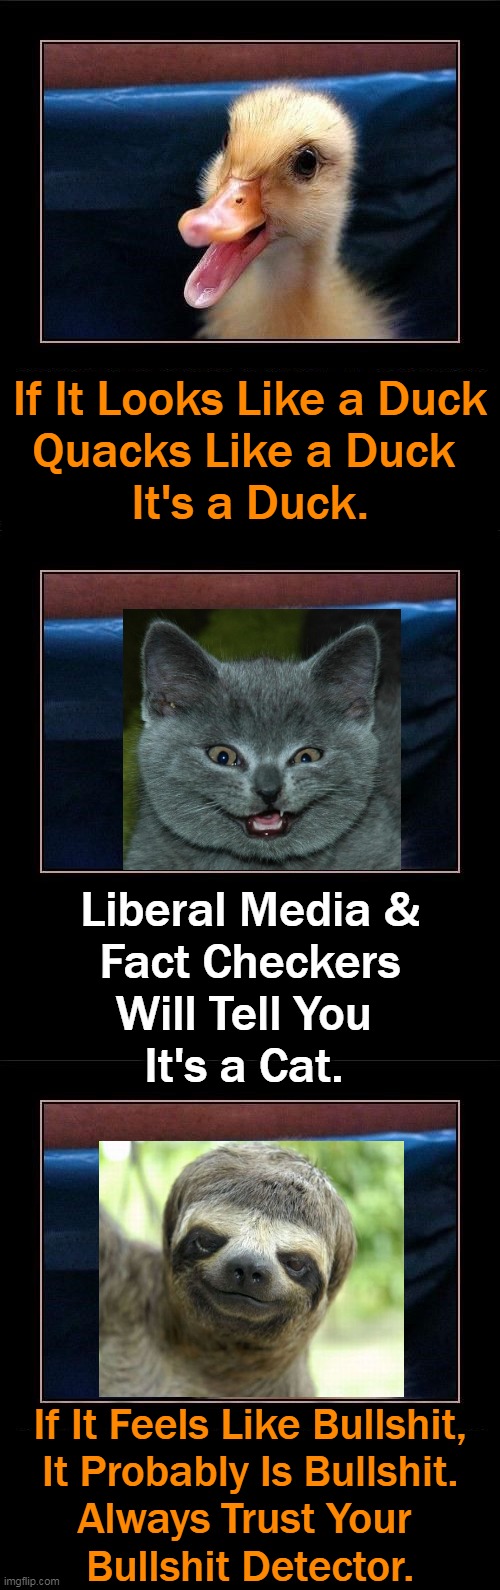 PSA For Survival in a Liberal World | If It Looks Like a Duck
Quacks Like a Duck 
It's a Duck. Liberal Media &
Fact Checkers
Will Tell You 
It's a Cat. If It Feels Like Bullshit,
It Probably Is Bullshit.
Always Trust Your 
Bullshit Detector. | image tagged in political meme,liberals vs conservatives,conservative logic,biased fact checkers,media lies,trust yourself | made w/ Imgflip meme maker